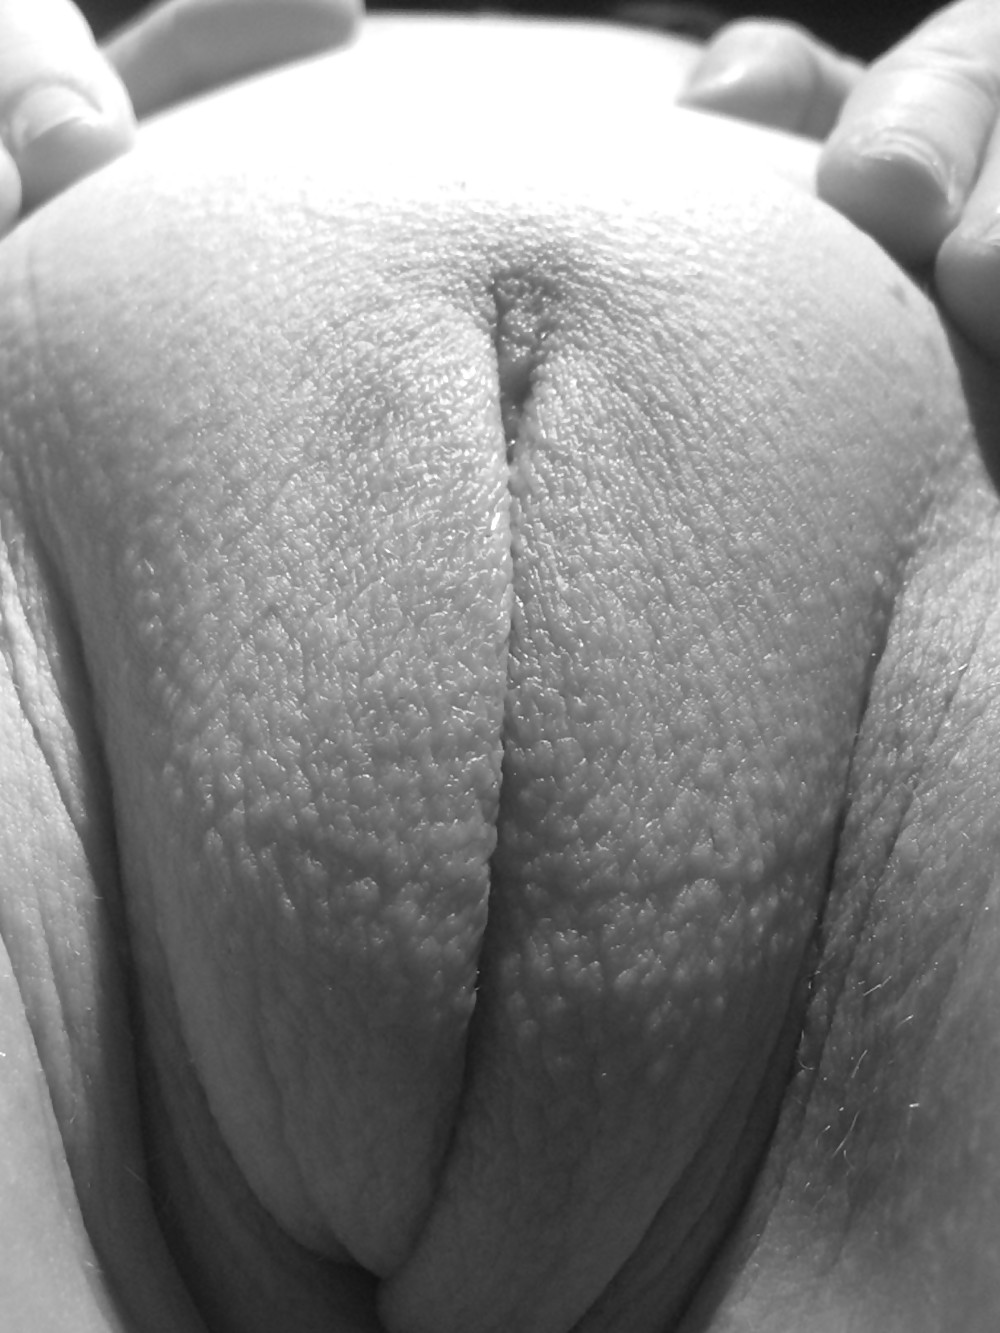 Black and white pussy closeups porn gallery.